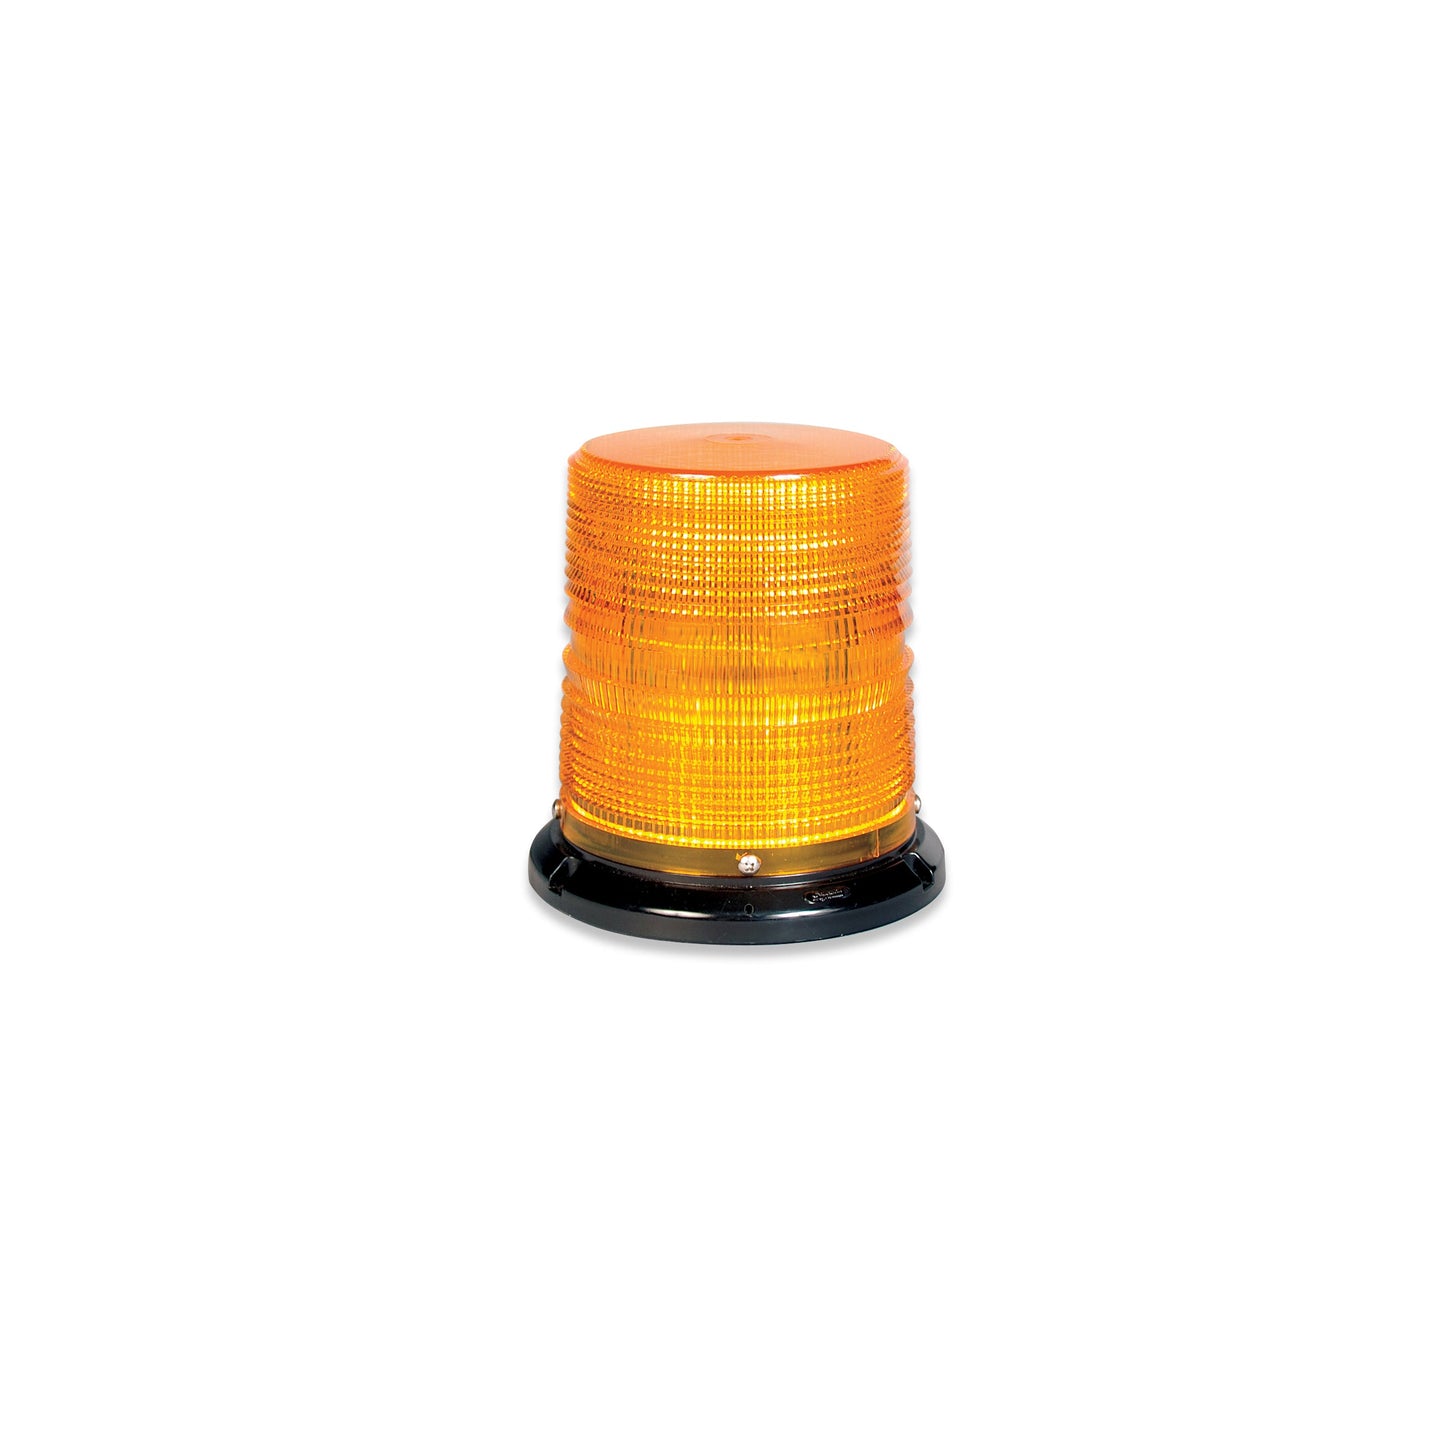 Soundoff Signal ELB45BML+RC 4500 Series Led Beacon, 10-30V, Sae J845 Class 1 - Magnetic Mount, 4" Clear Dome/ Red Leds